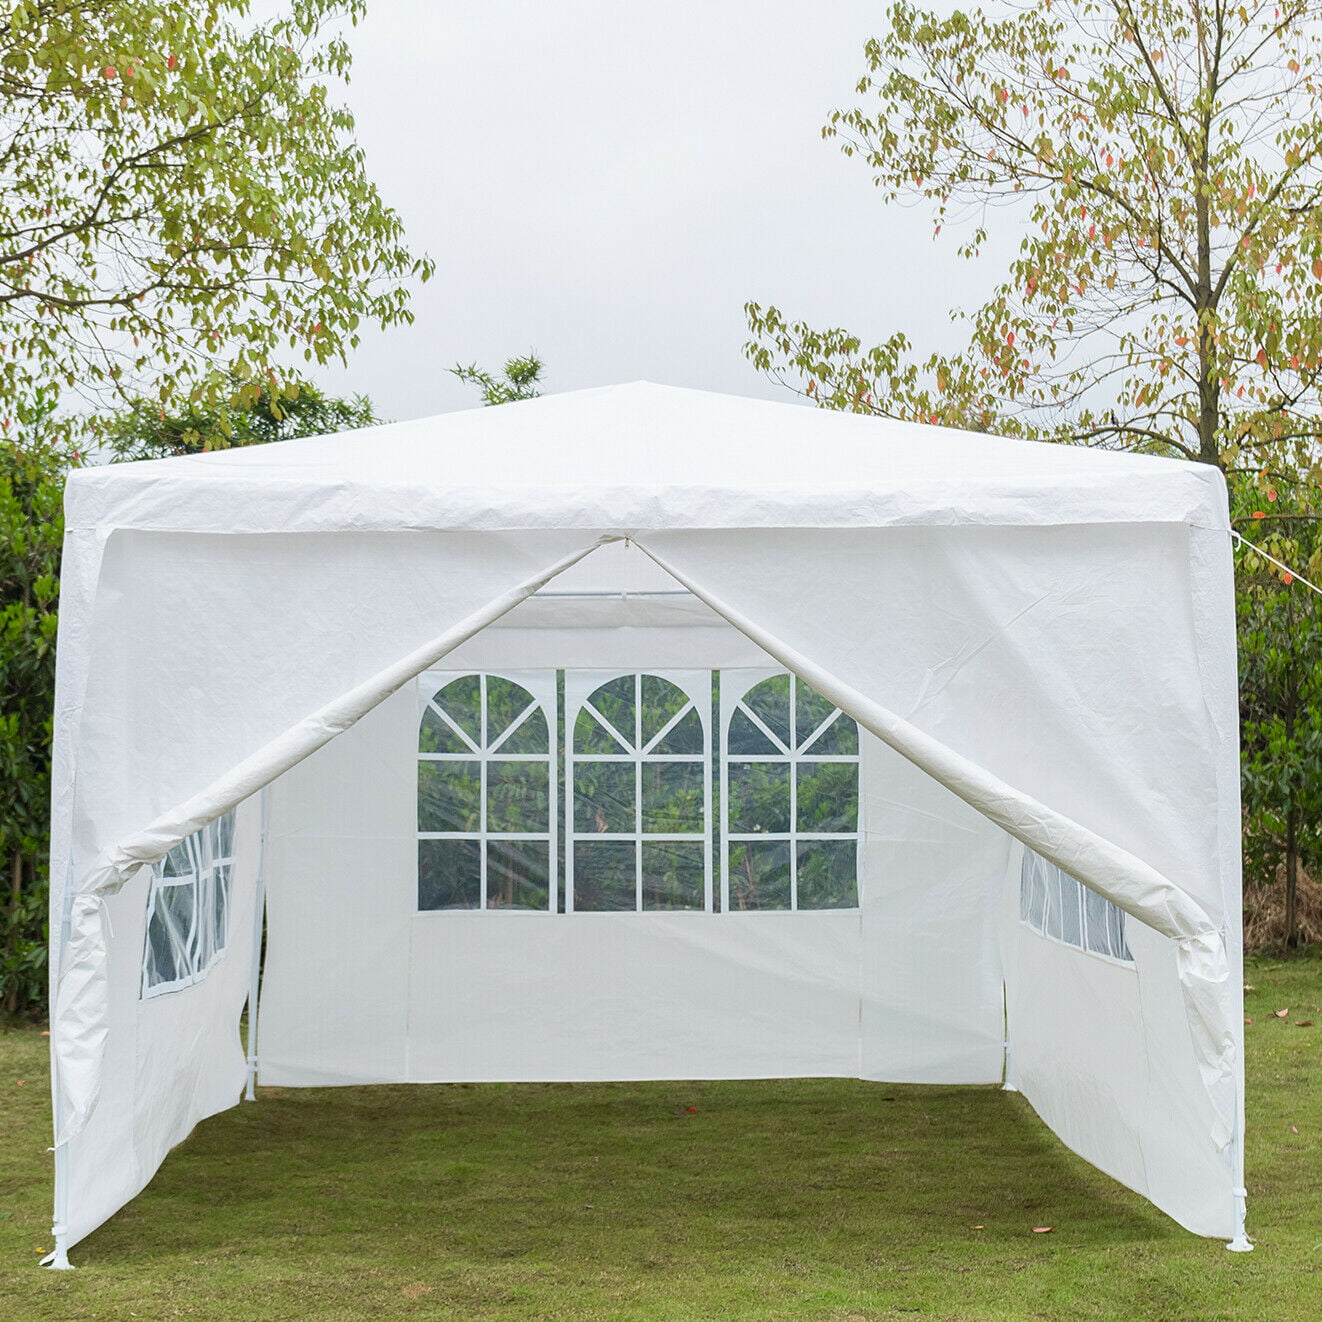 Instant Shelter Beach Canopy for Wedding Camping Birthday Party 10x30 Feet Heavy Duty Canopy Tent 8 Sides 2 Doors Waterproof Gazebos White 